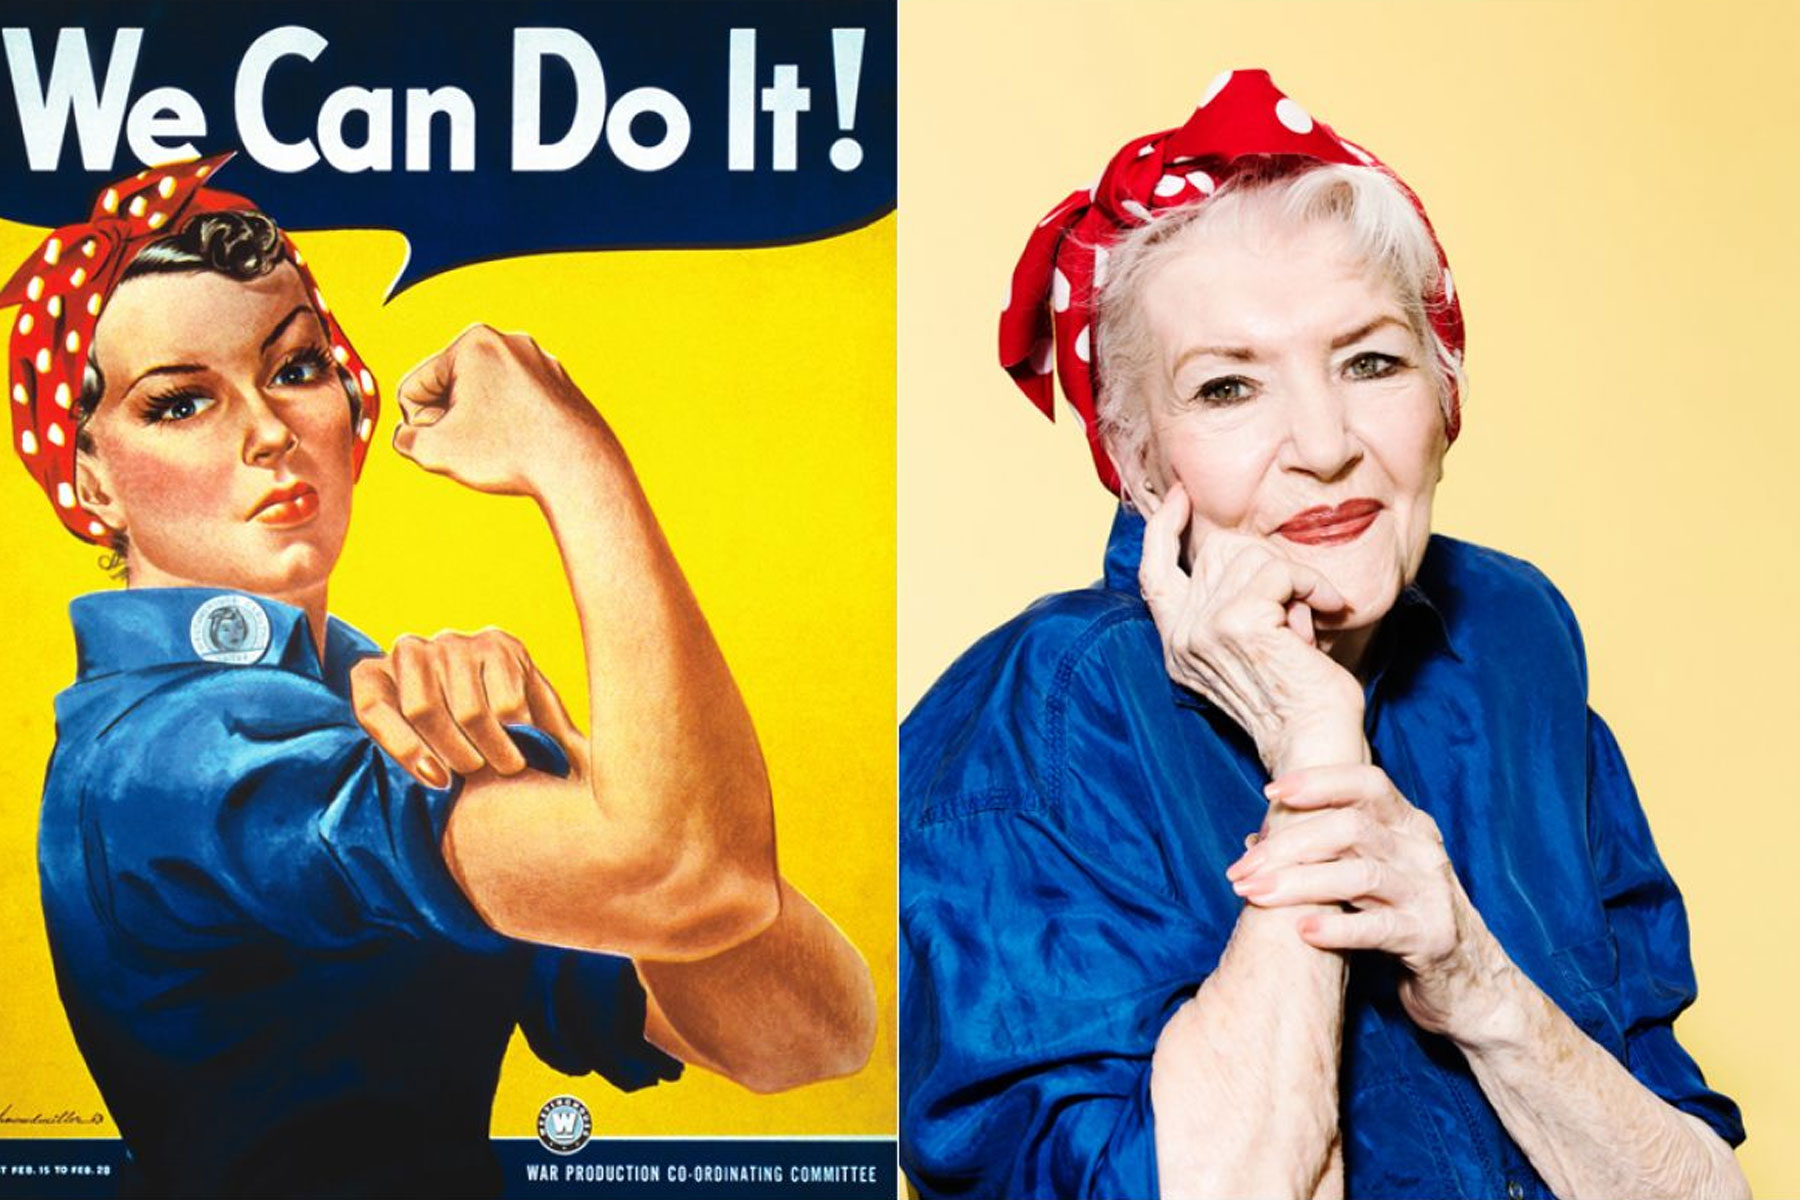 We can start our. Рози Клепальщица Рокуэлл. Клепальщицы Рози (Rosie the Riveter). Клепальщица Рози плакат.